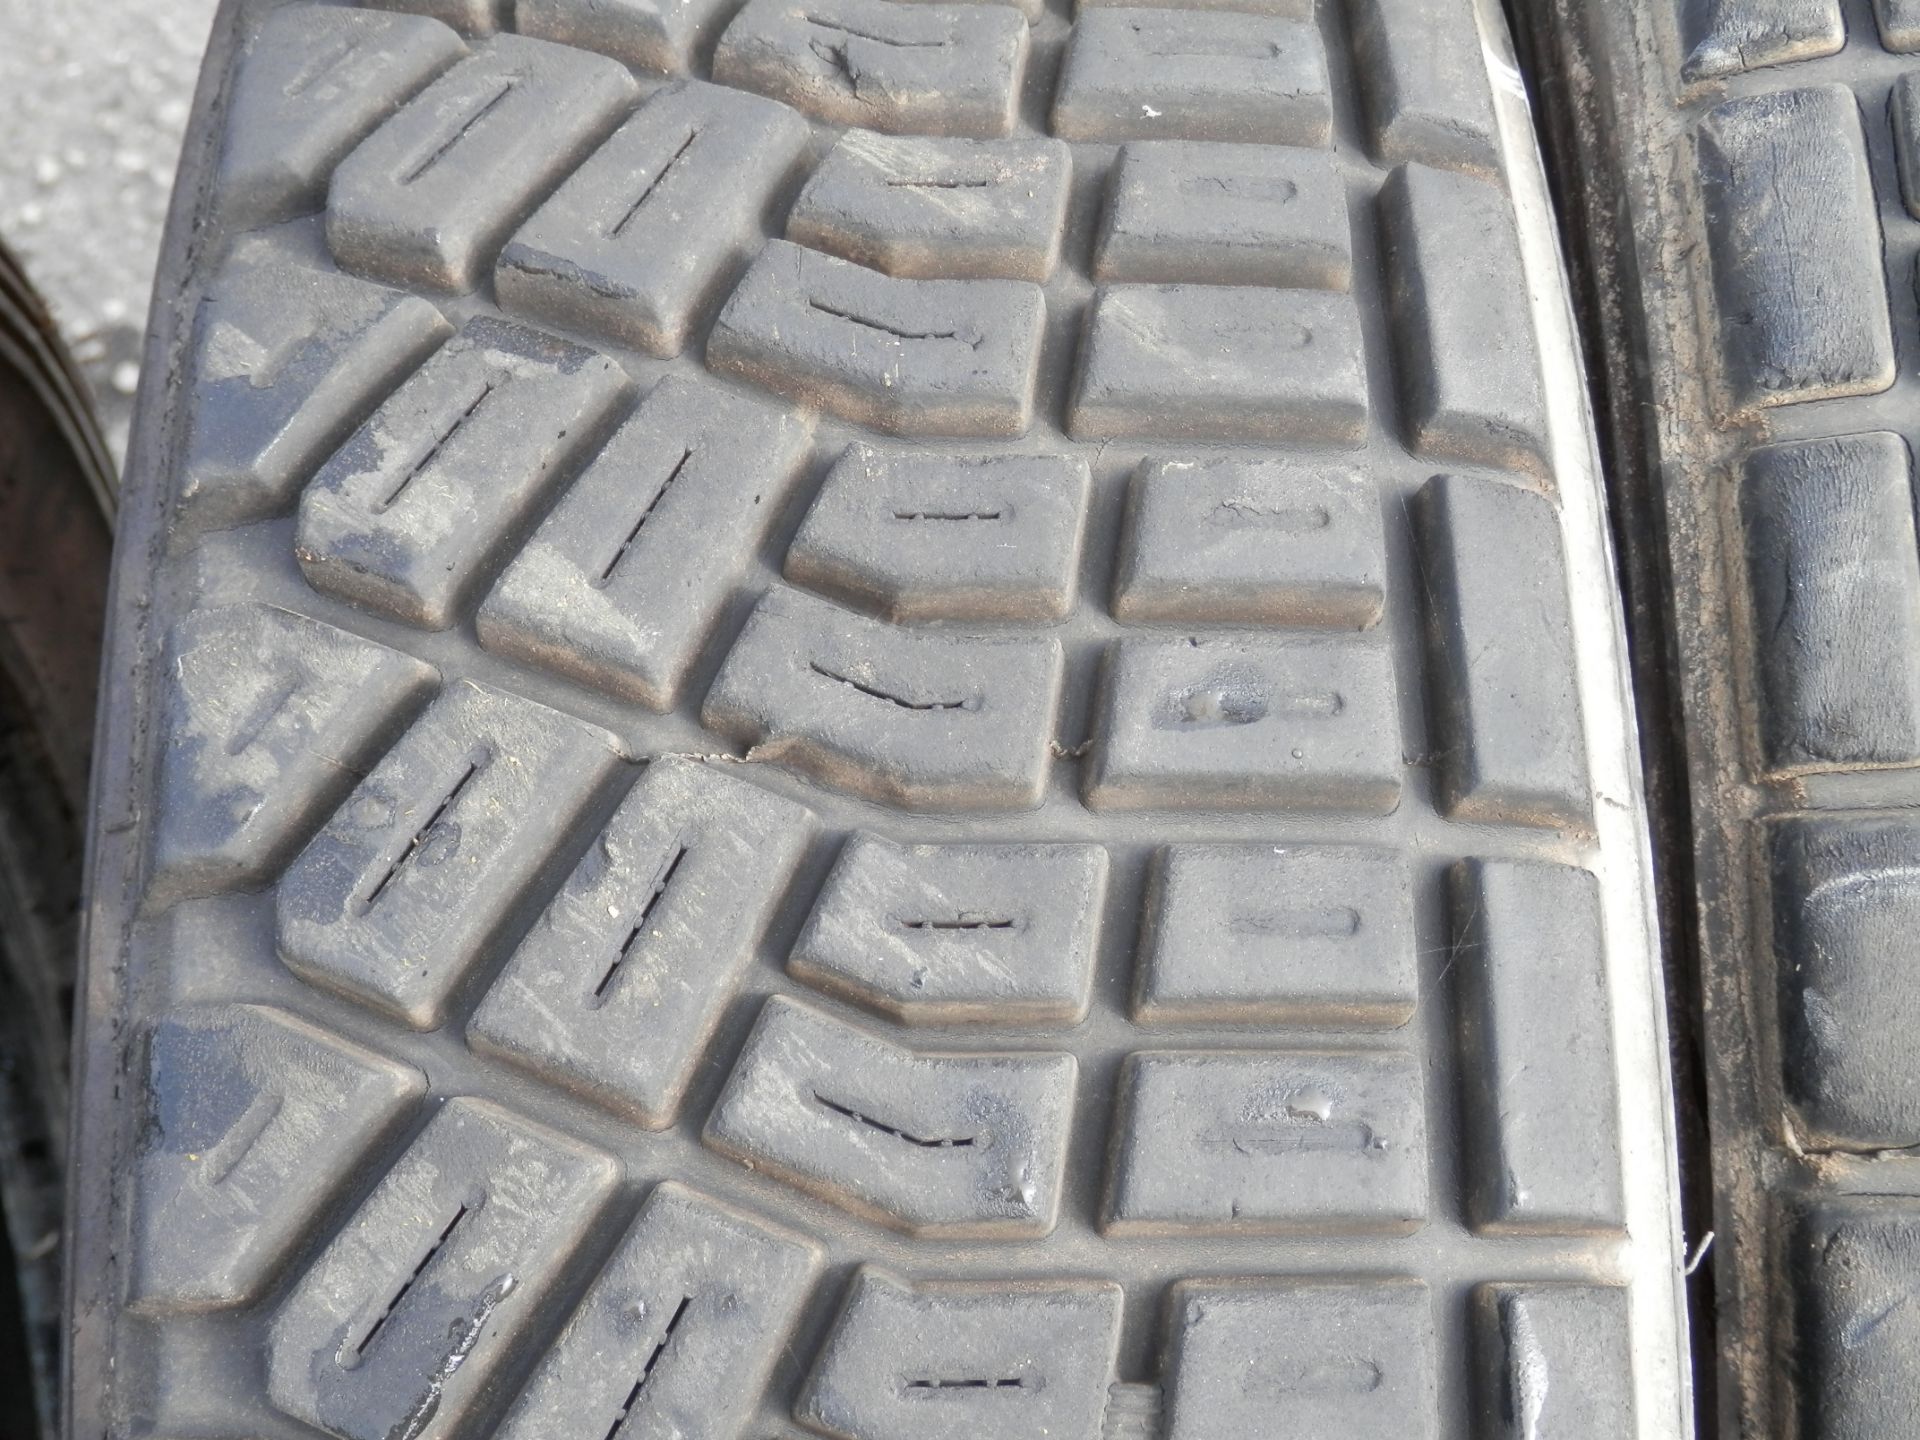 4 X DUNLOP DIREZZA RALLYE/OFF ROAD TYRES, 185/65/15 FROM A 2000 MITSUBISHI EVOLUTION. - Image 4 of 8